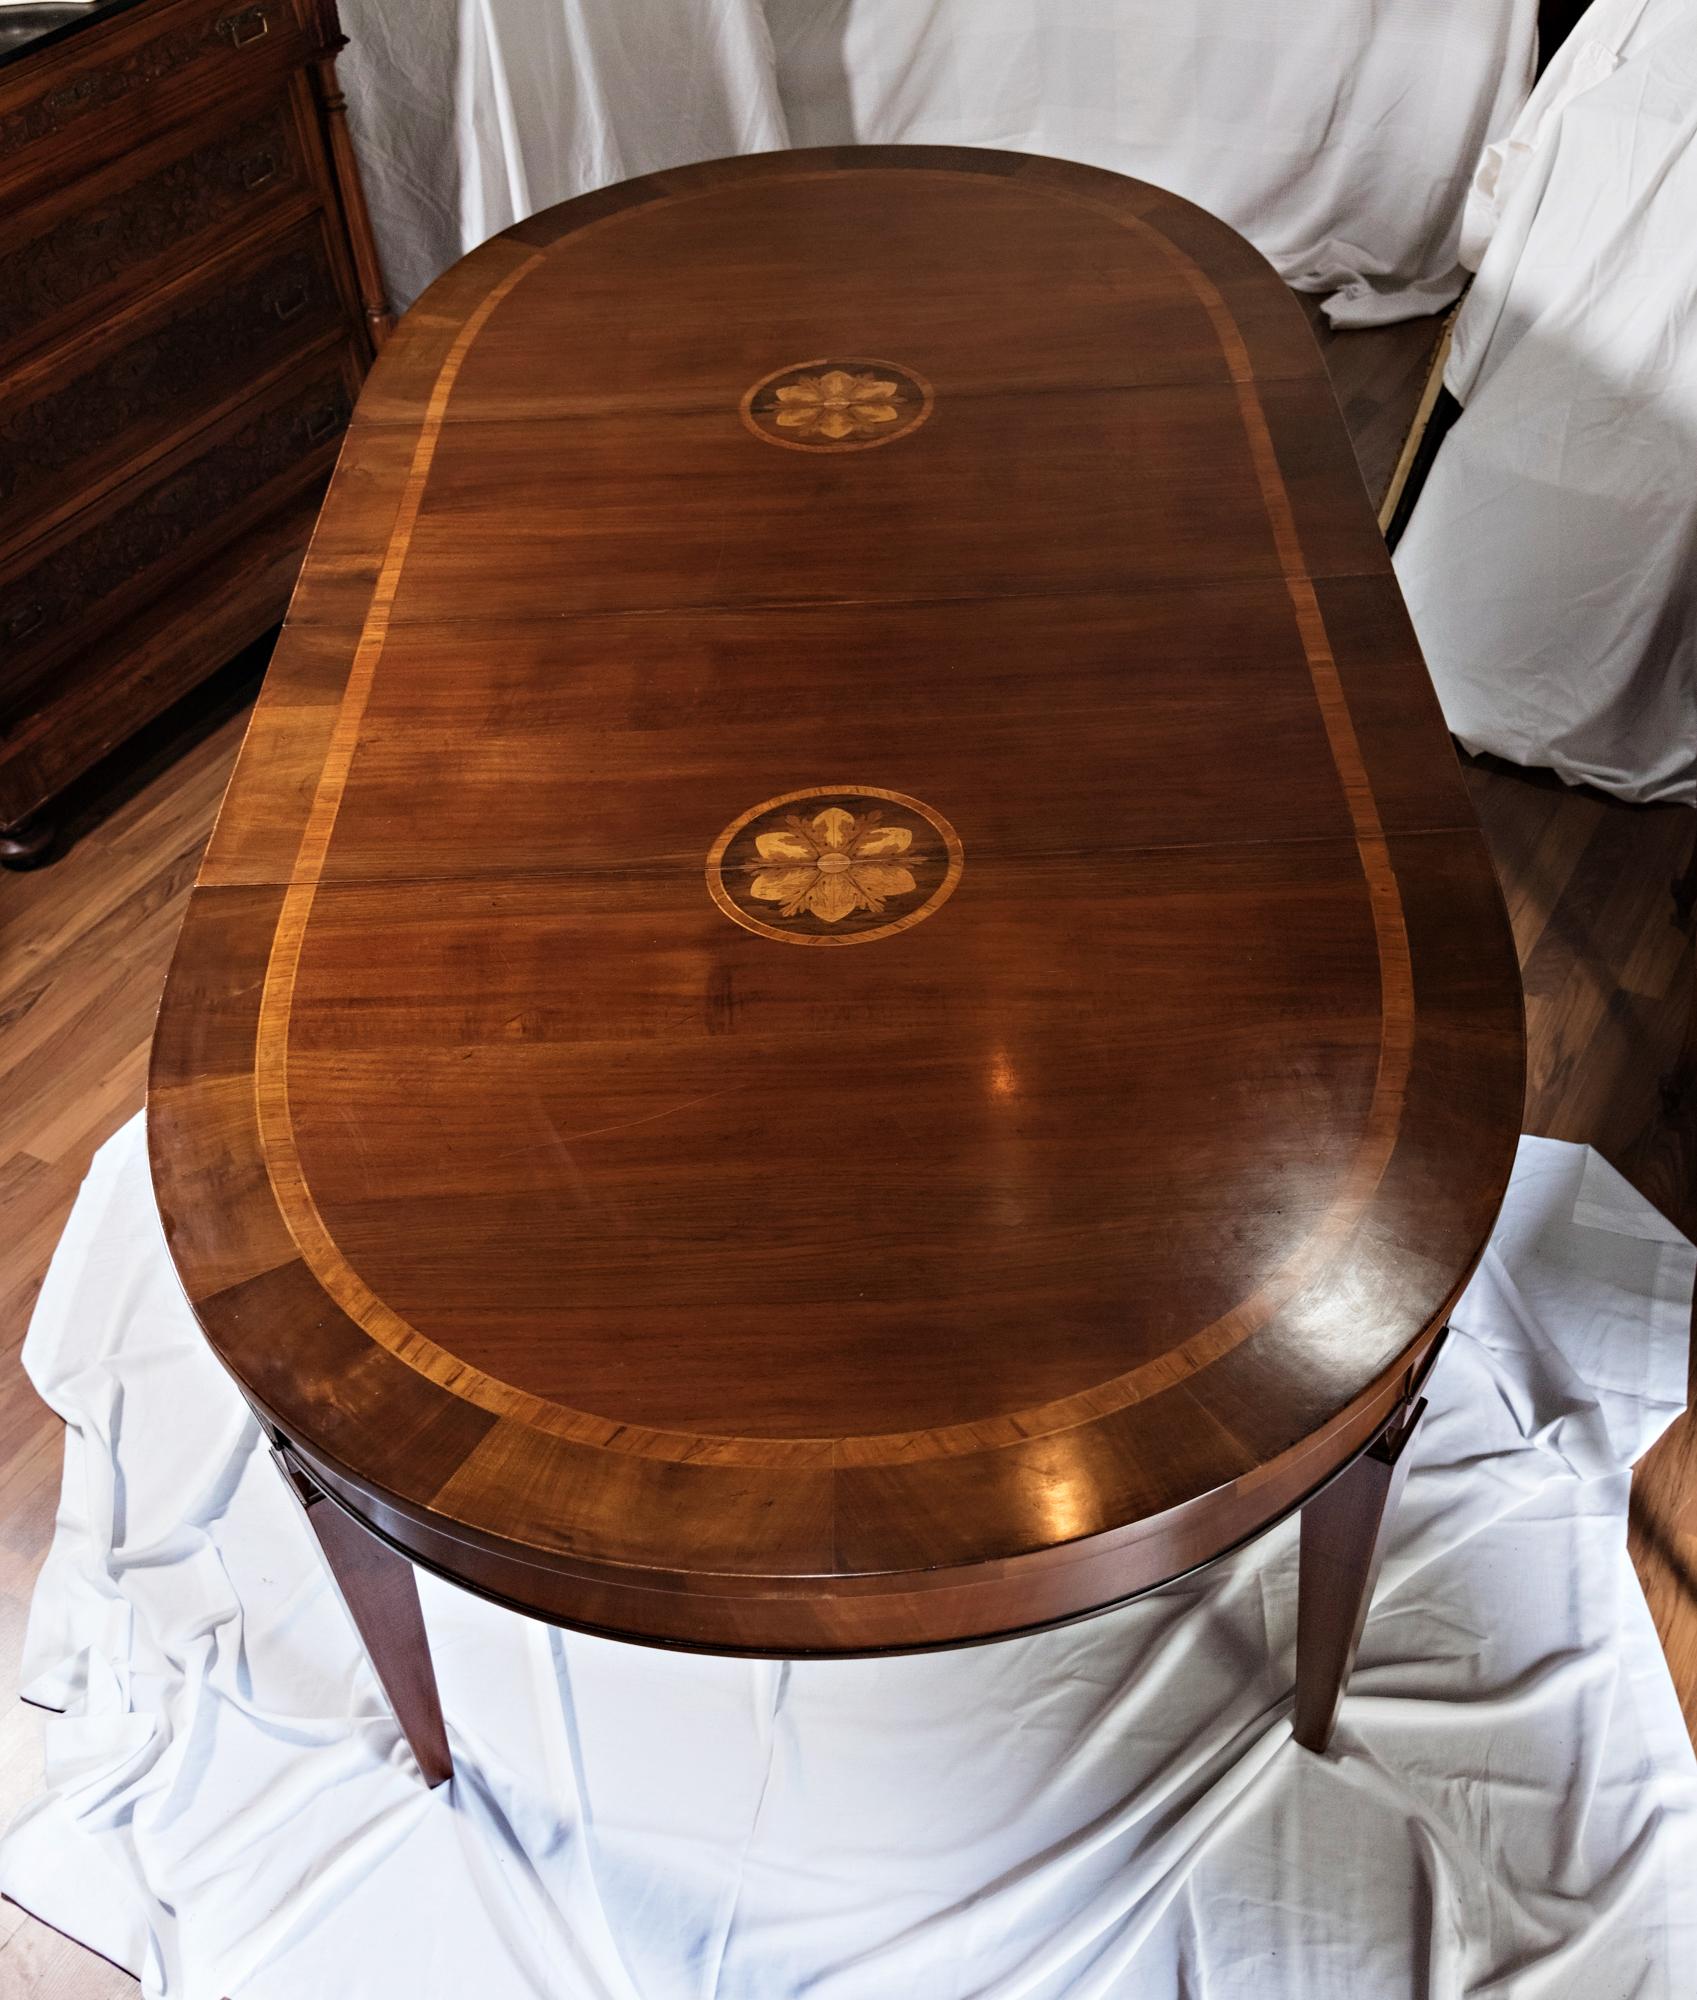 Late 19th century Louis XVI walnut inlay dining table. This gorgeous table has inlay trim encircling the top,  as well as two beautiful inlaid acorn rosettes when both leaves are in place. The table is 105.5 inches long with the two leaves and 67